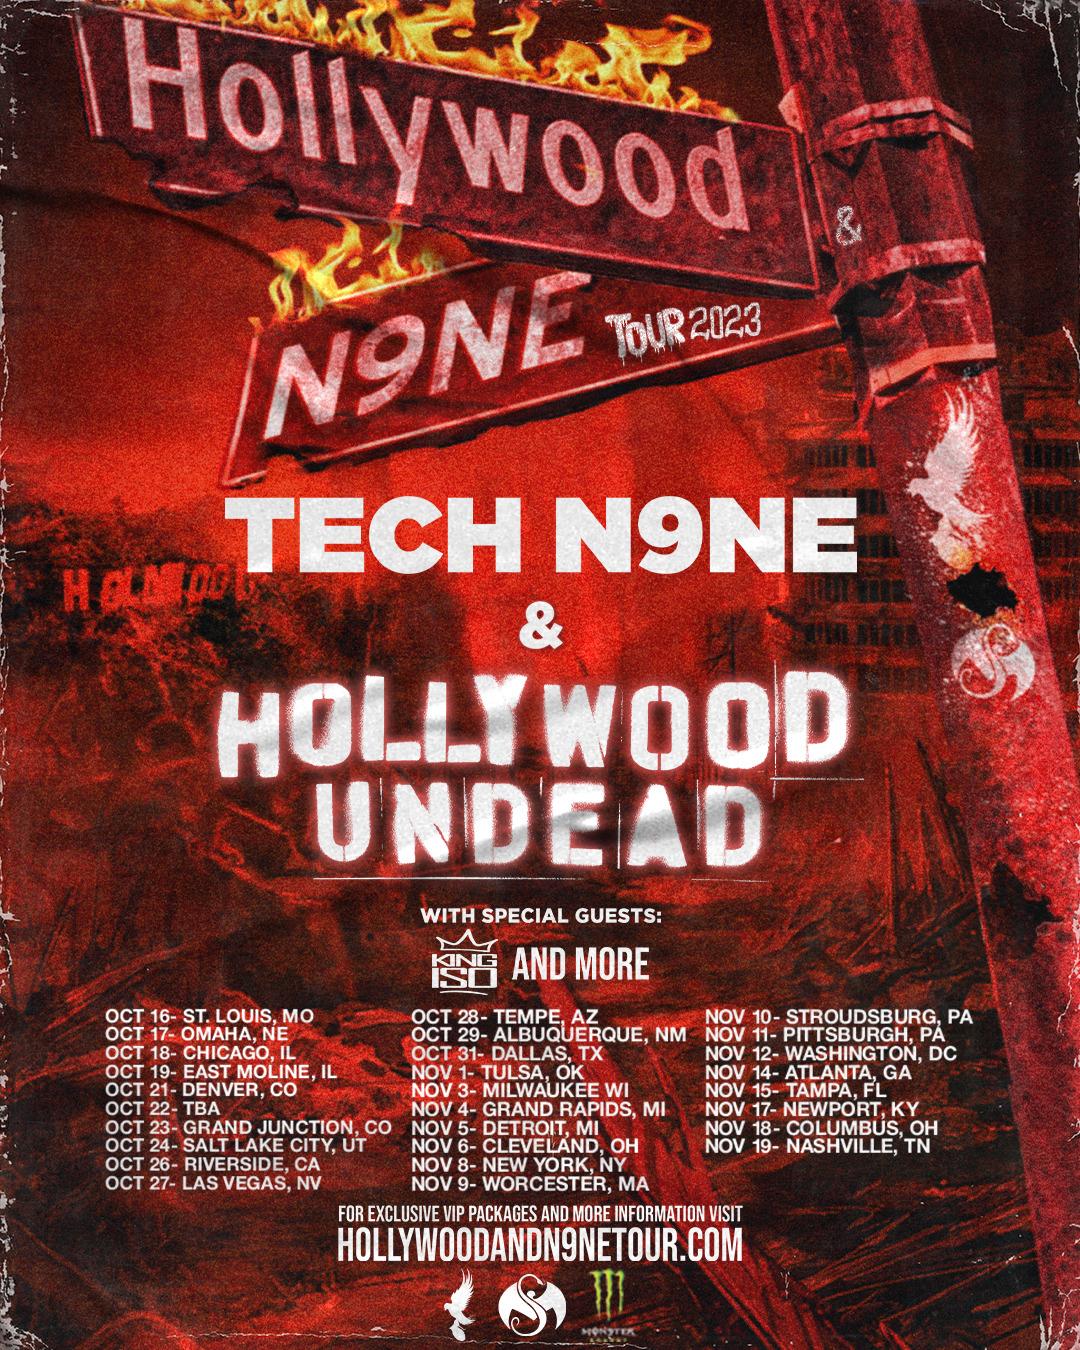 Hollywood Undead team up with Tech N9ne for Fall Tour